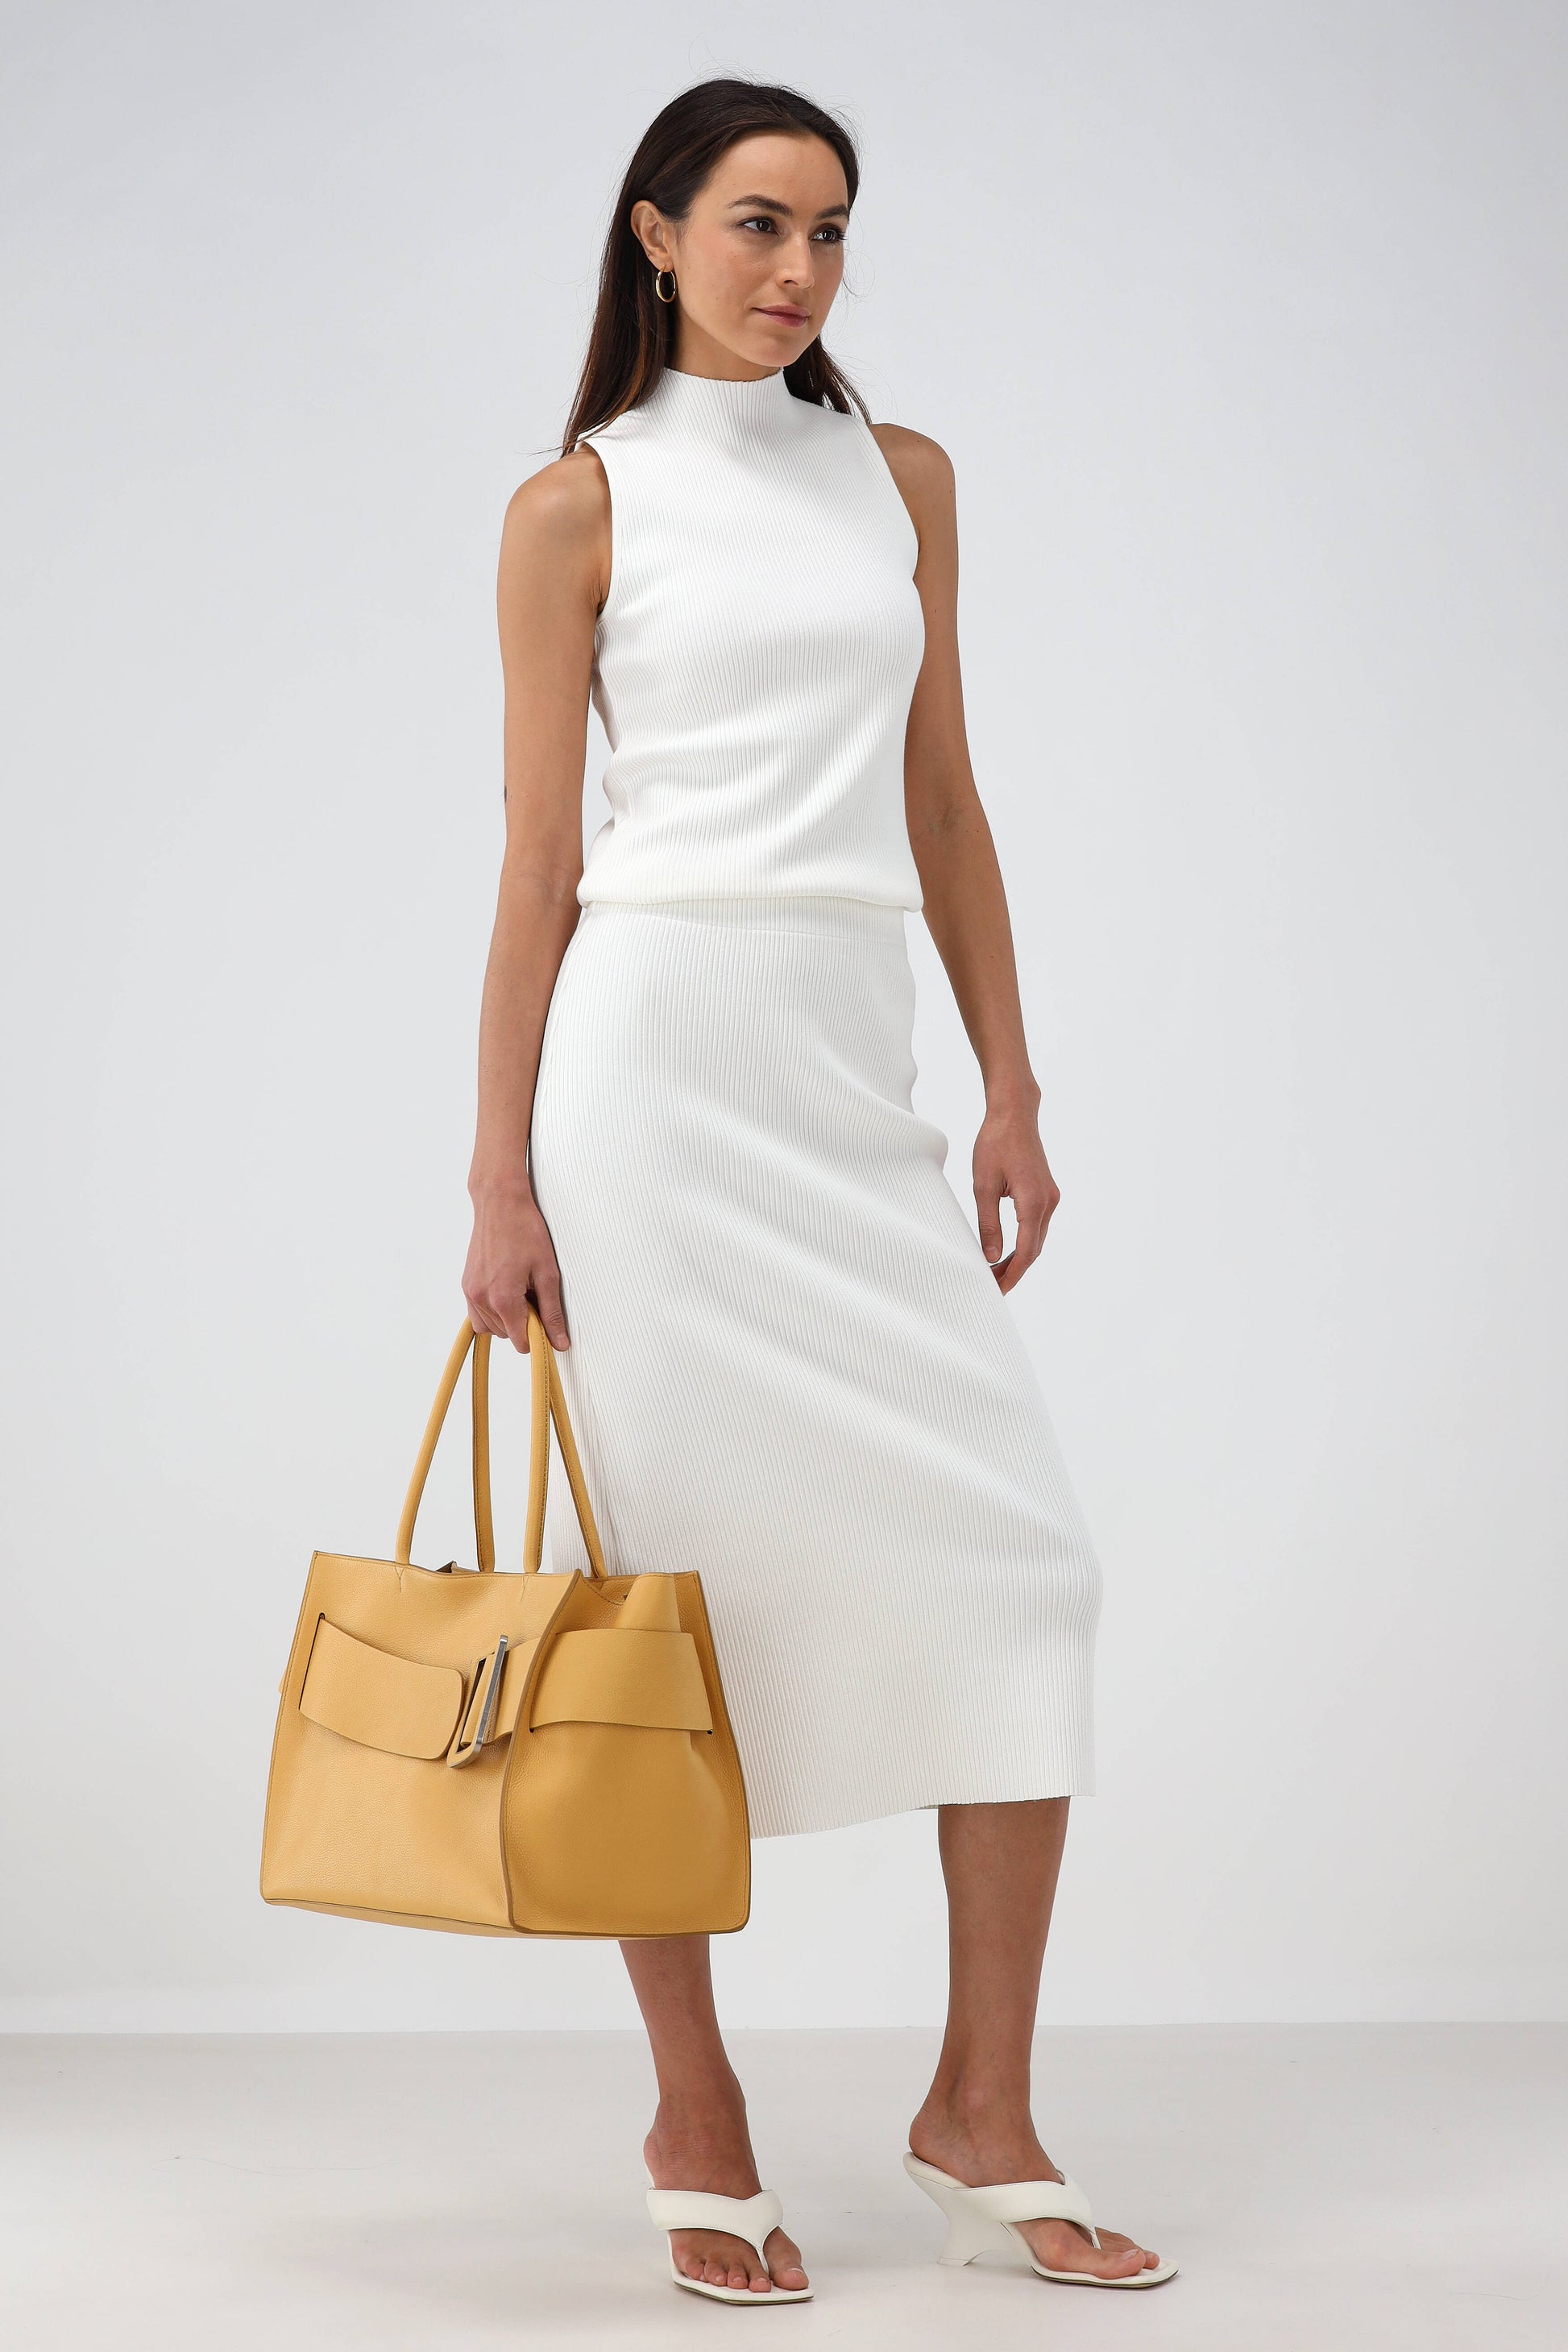 Rock Ribbed Midi in Off-WhiteVince - Anita Hass